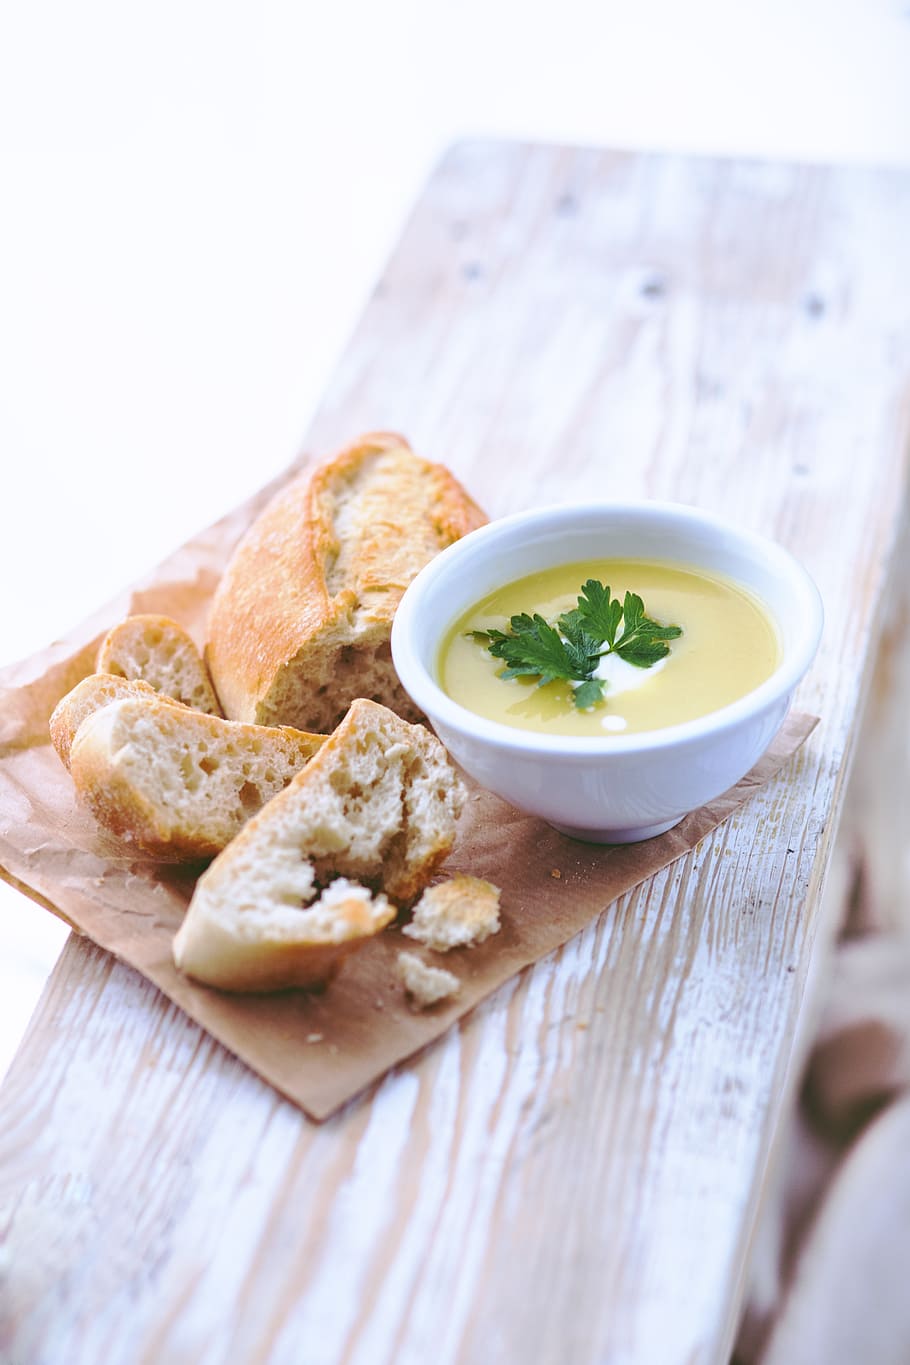 bread, soup dish, leek, potato, soup, healthy, white, bowl, cooking, food and drink